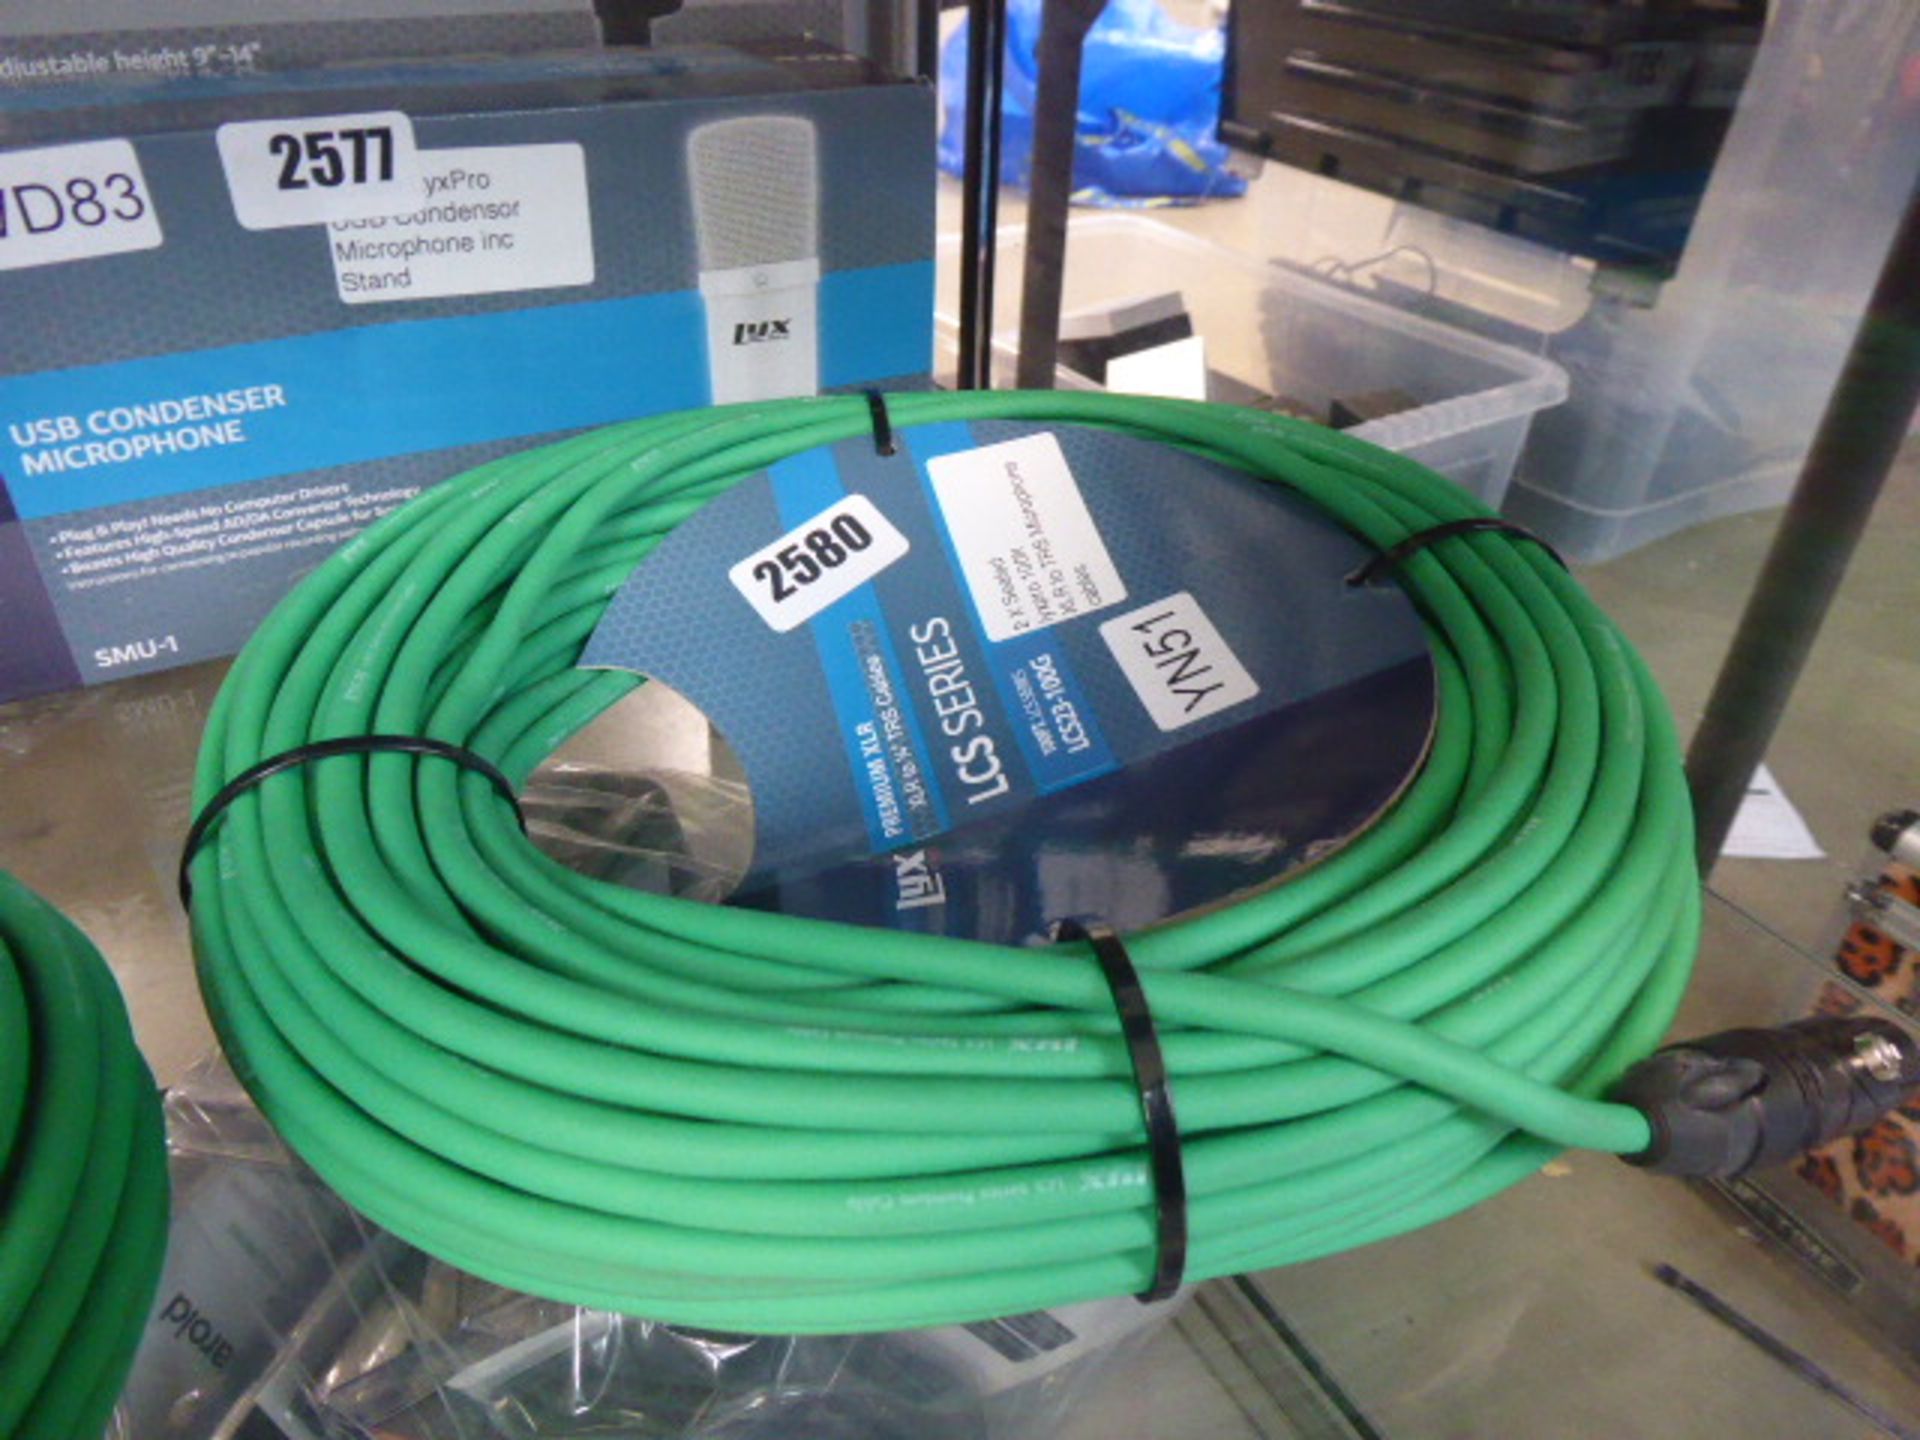 Lyx pro premium XLR-TRS cables in green (100ft)